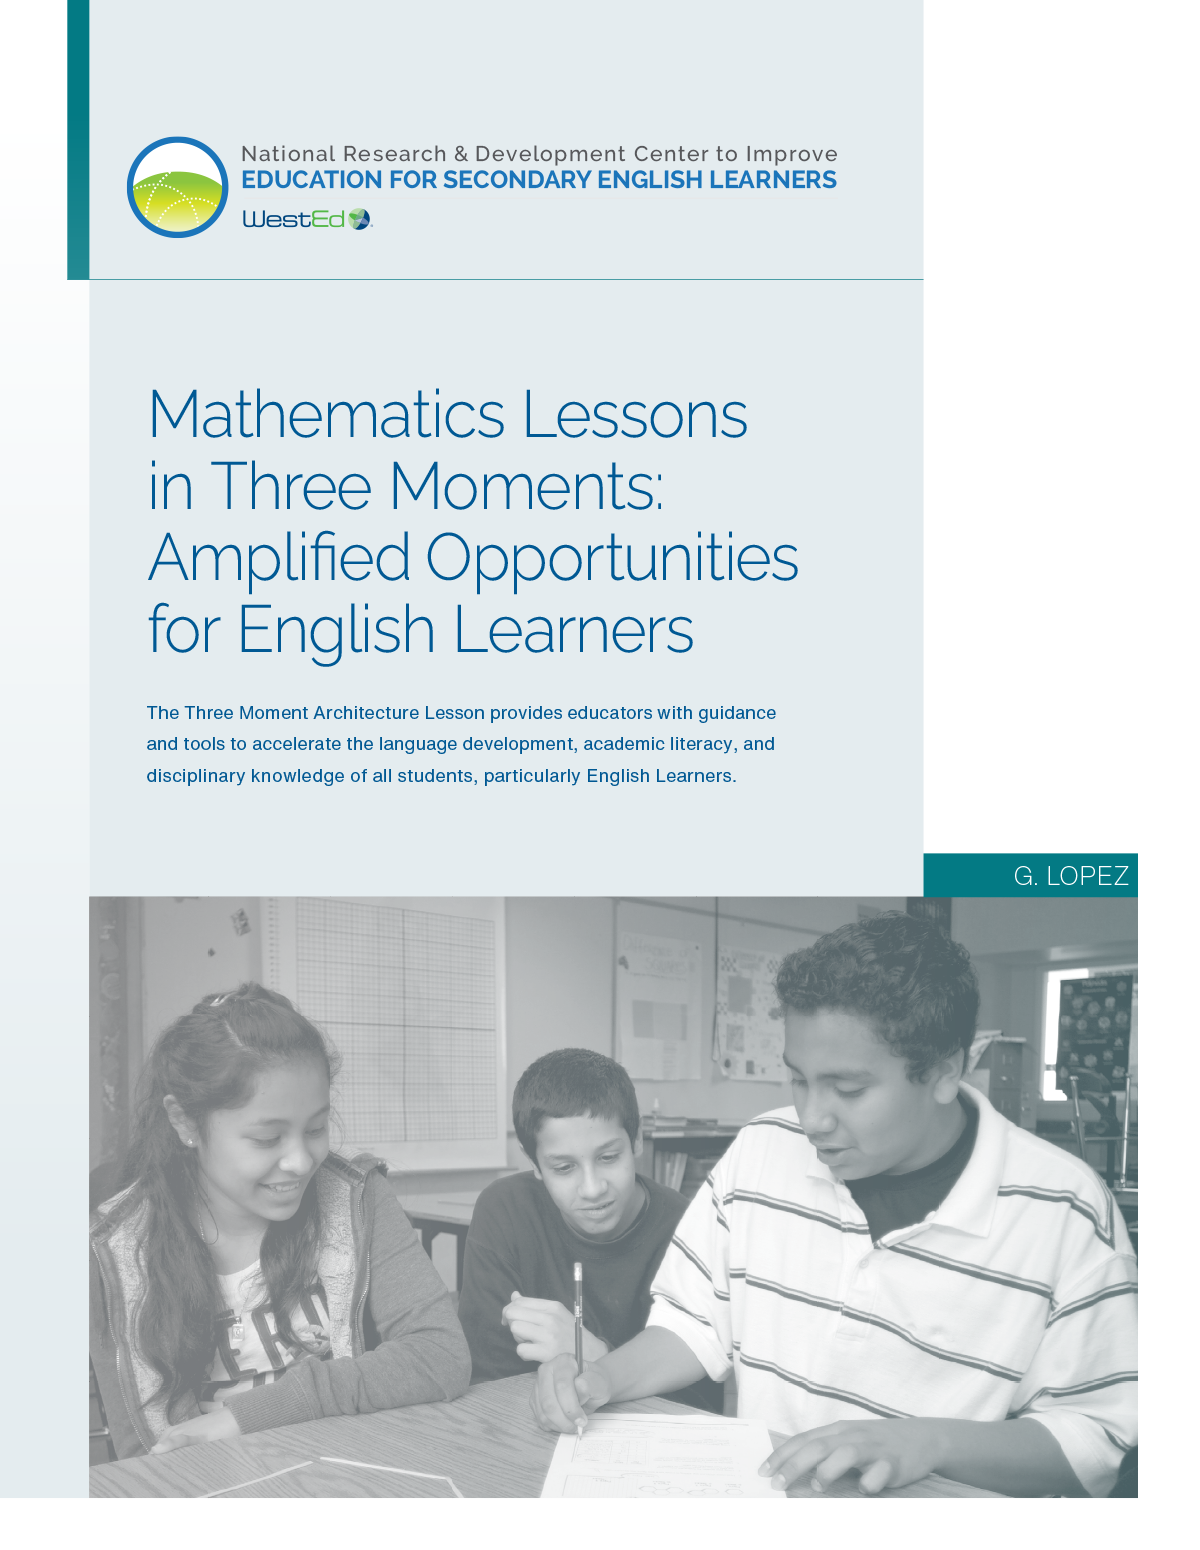 Mathematics Lessons in Three Moments: Amplified Opportunities for English Learners